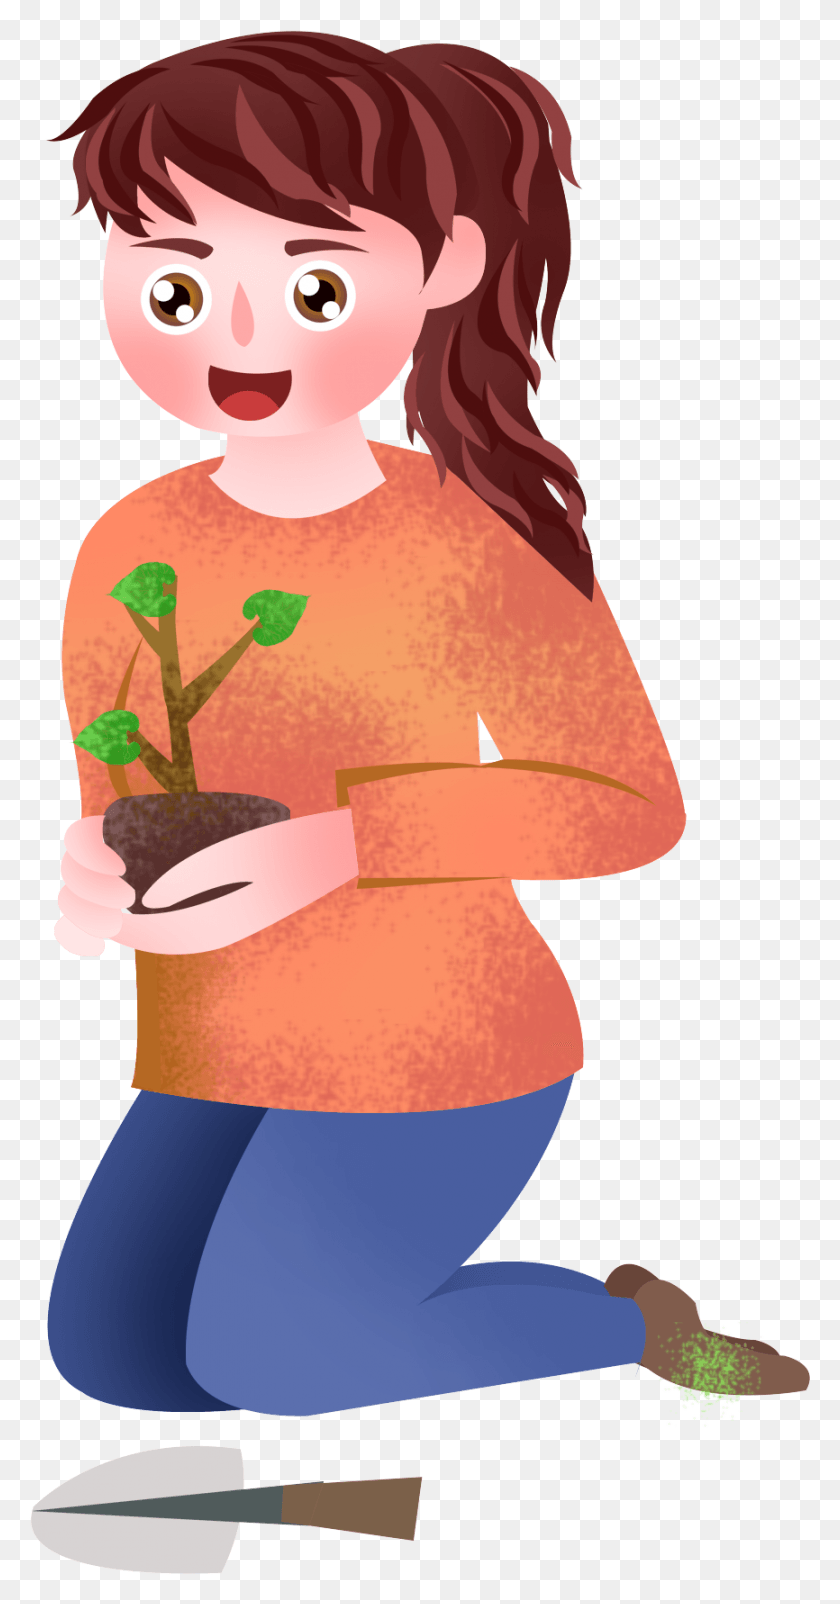 866x1715 Hand Painted Illustration Character Girl And Psd Cartoon, Plant, Shoulder, Clothing Descargar Hd Png